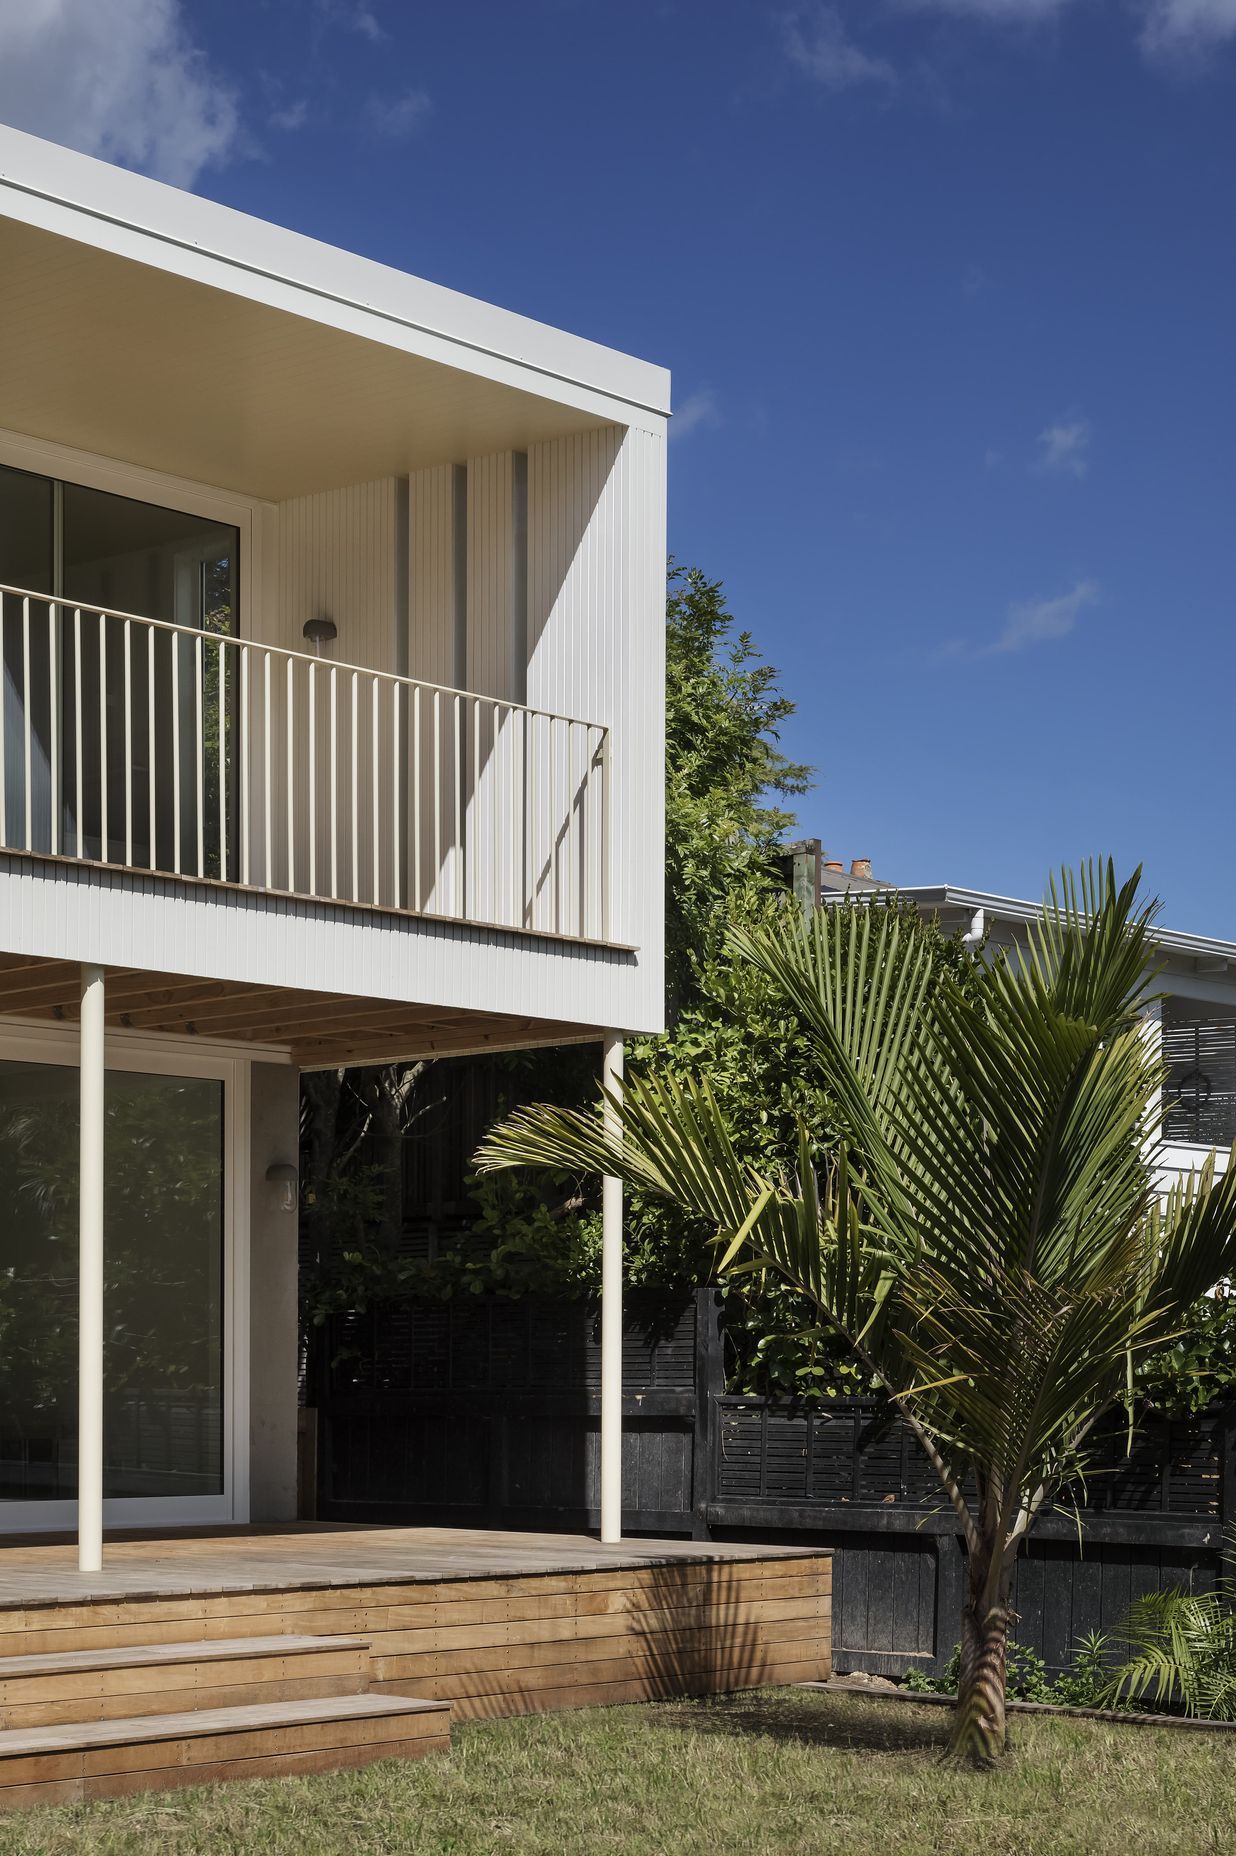 The villa renovation reimagined the back of the property, adding a covered balcony that looks out over the leafy streets of Grey Lynn. Photo: David Straight